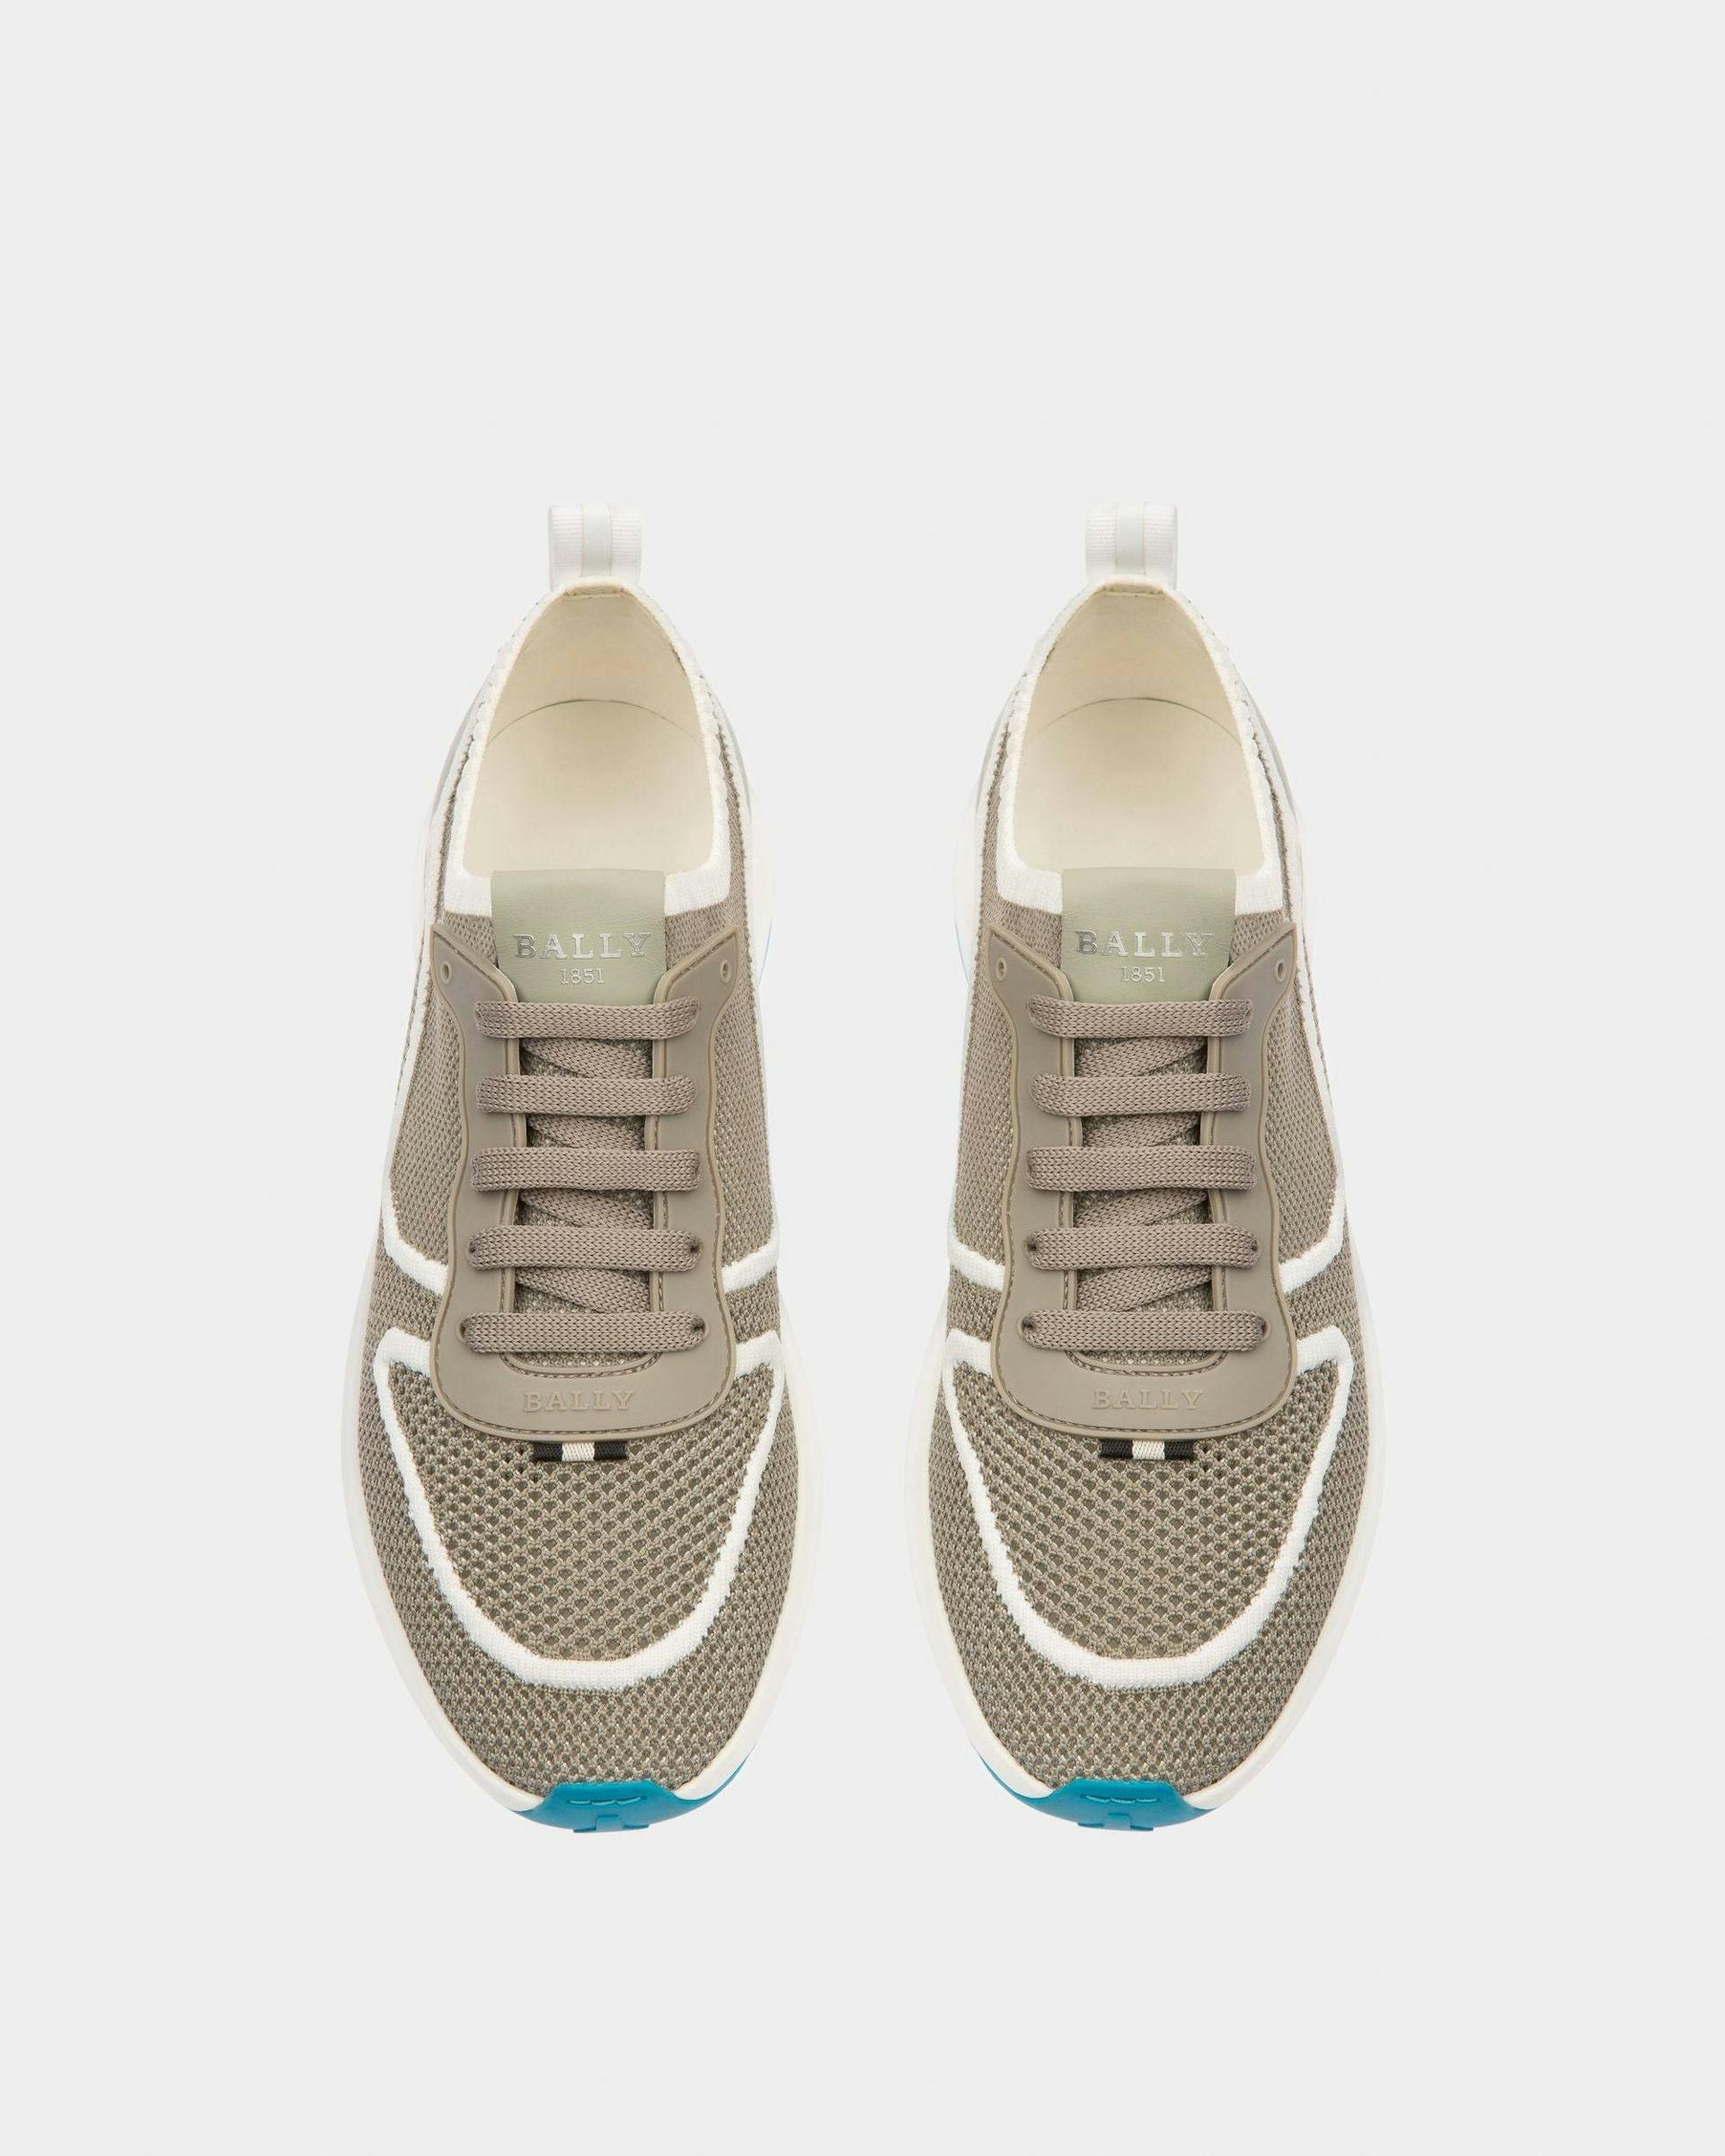 Davyn Mesh And Leather Sneakers In Grey And White - Men's - Bally - 02